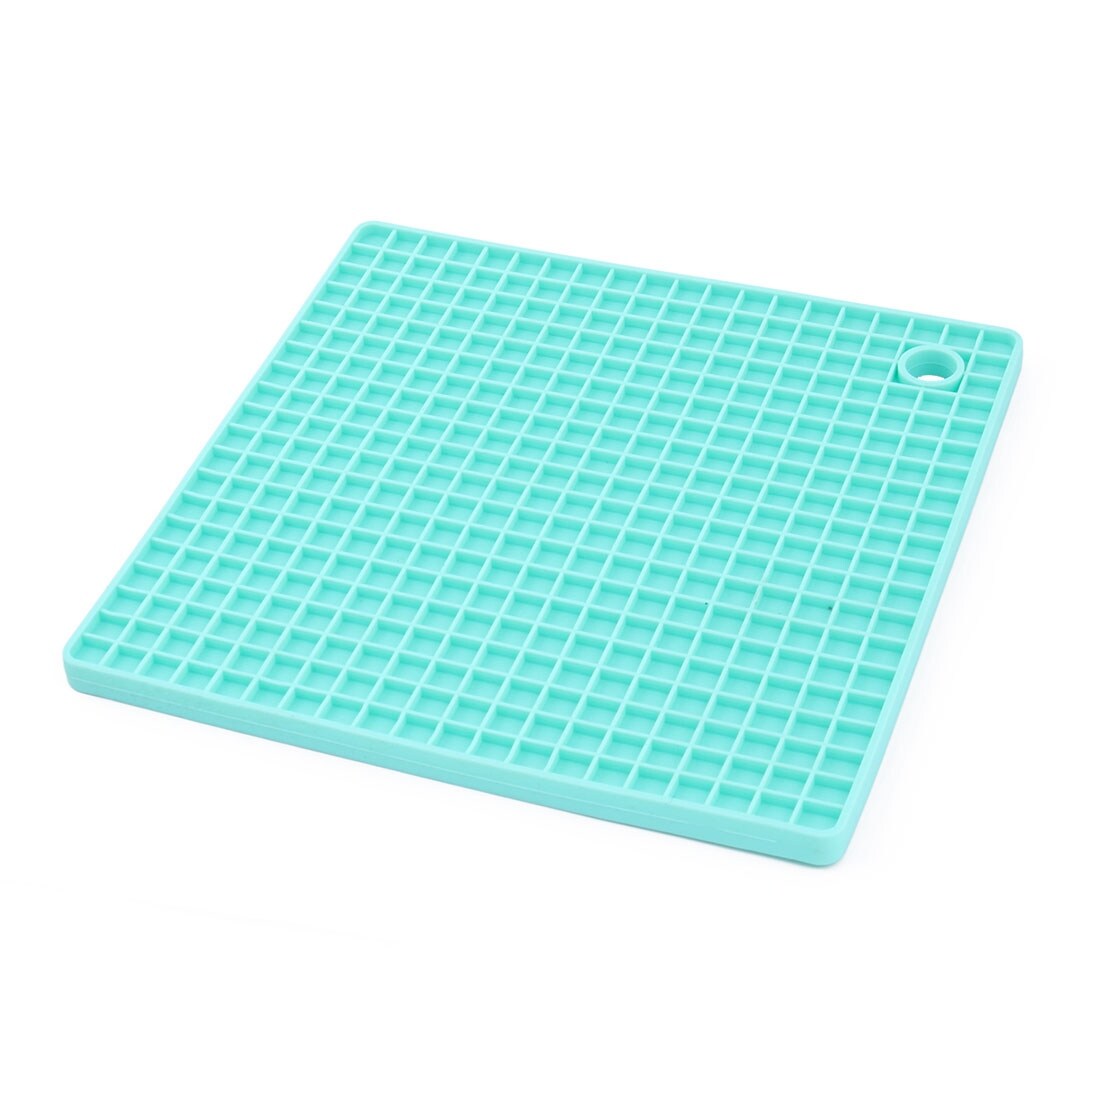 https://ak1.ostkcdn.com/images/products/is/images/direct/df1c57e75b55c0d67048ae377bc890fcd303b09c/Silicone-Nonslip-Heat-Resistant-Bowl-Plate-Mat-Table-Protector-Placemat-Cyan.jpg